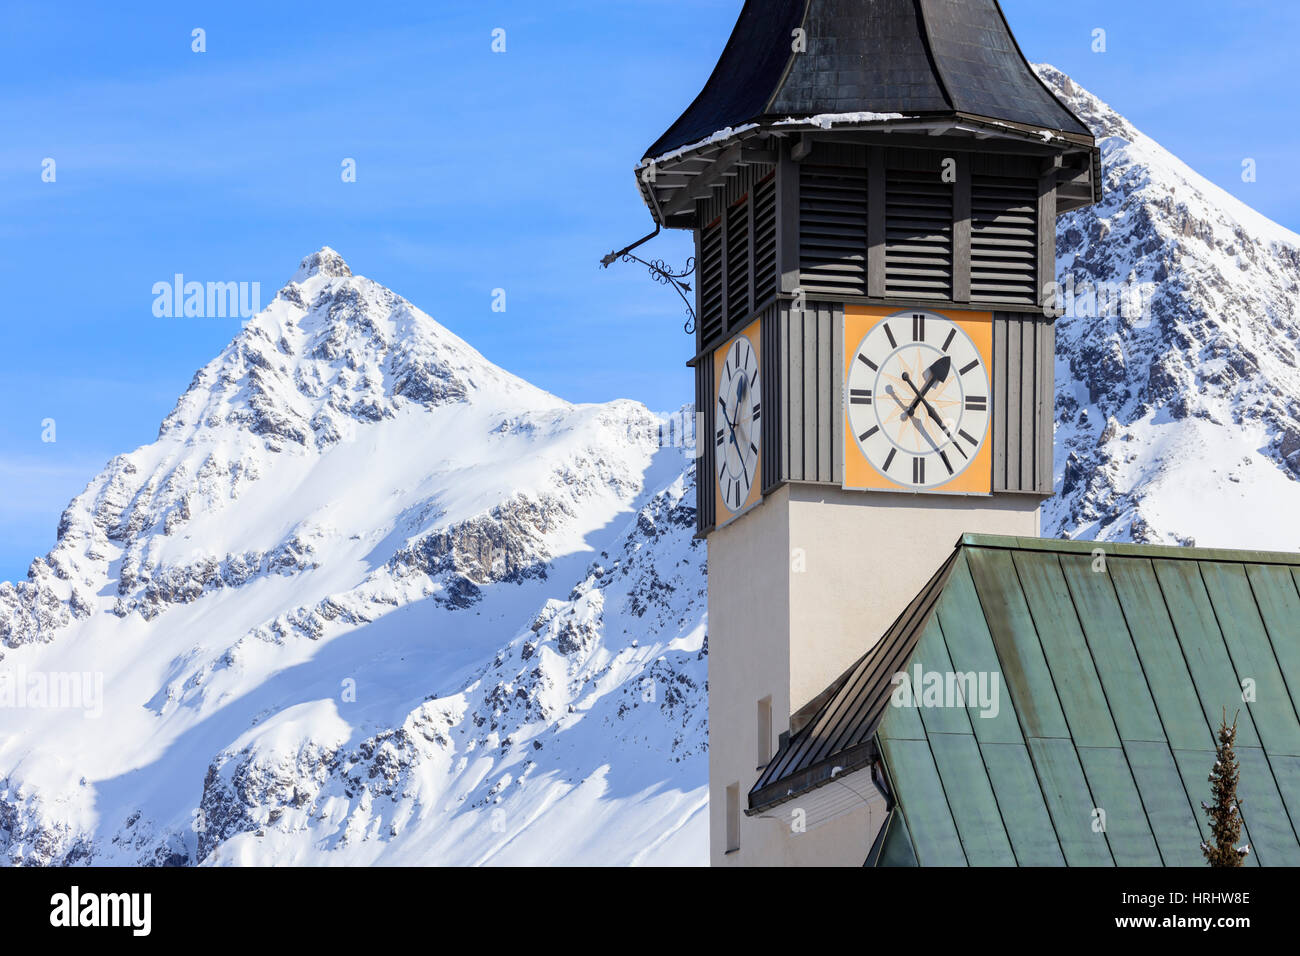 The typical alpine bell tower frames the snowy peaks, Langwies, district of Plessur, Canton of Graubunden, Switzerland Stock Photo